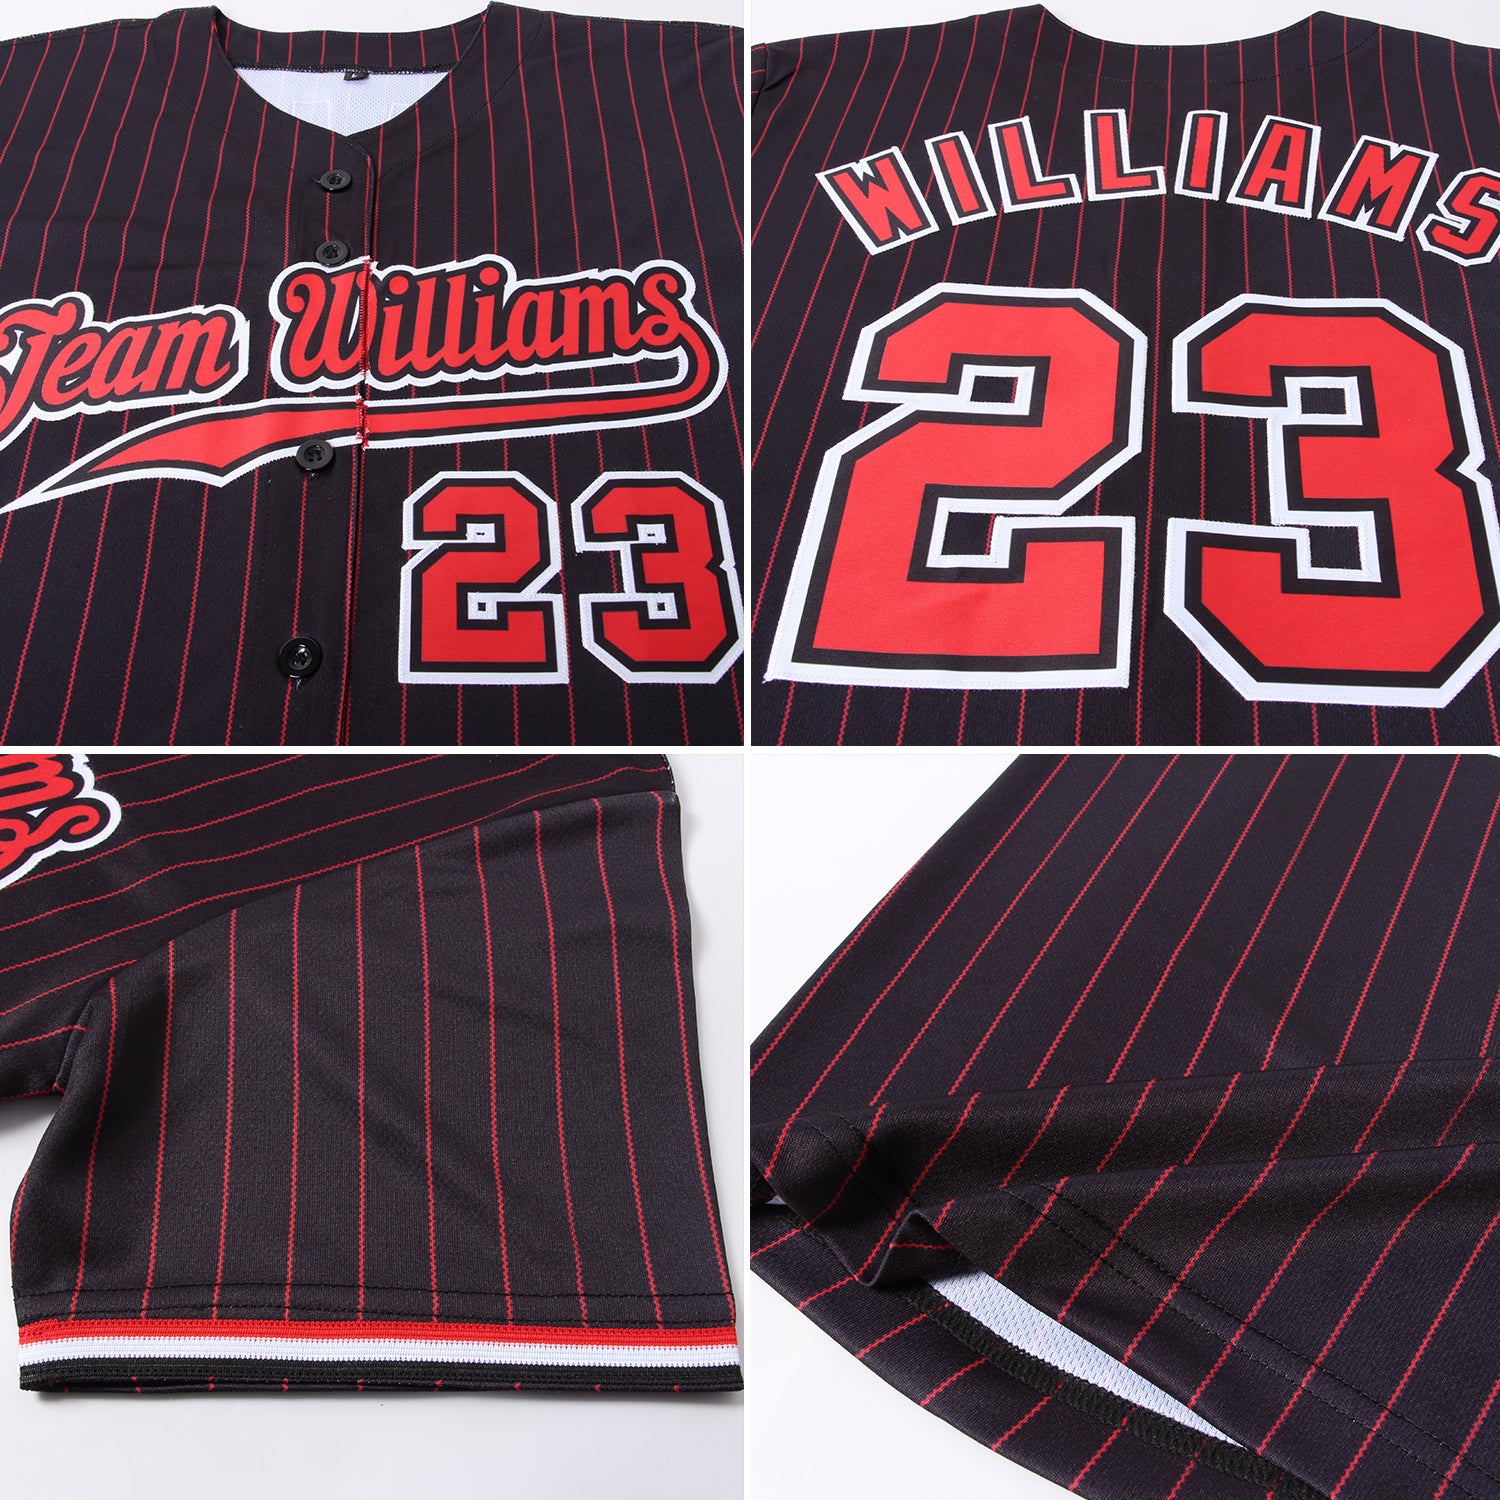 Custom Baseball Jersey White Black Pinstripe Red Authentic Youth Size:M